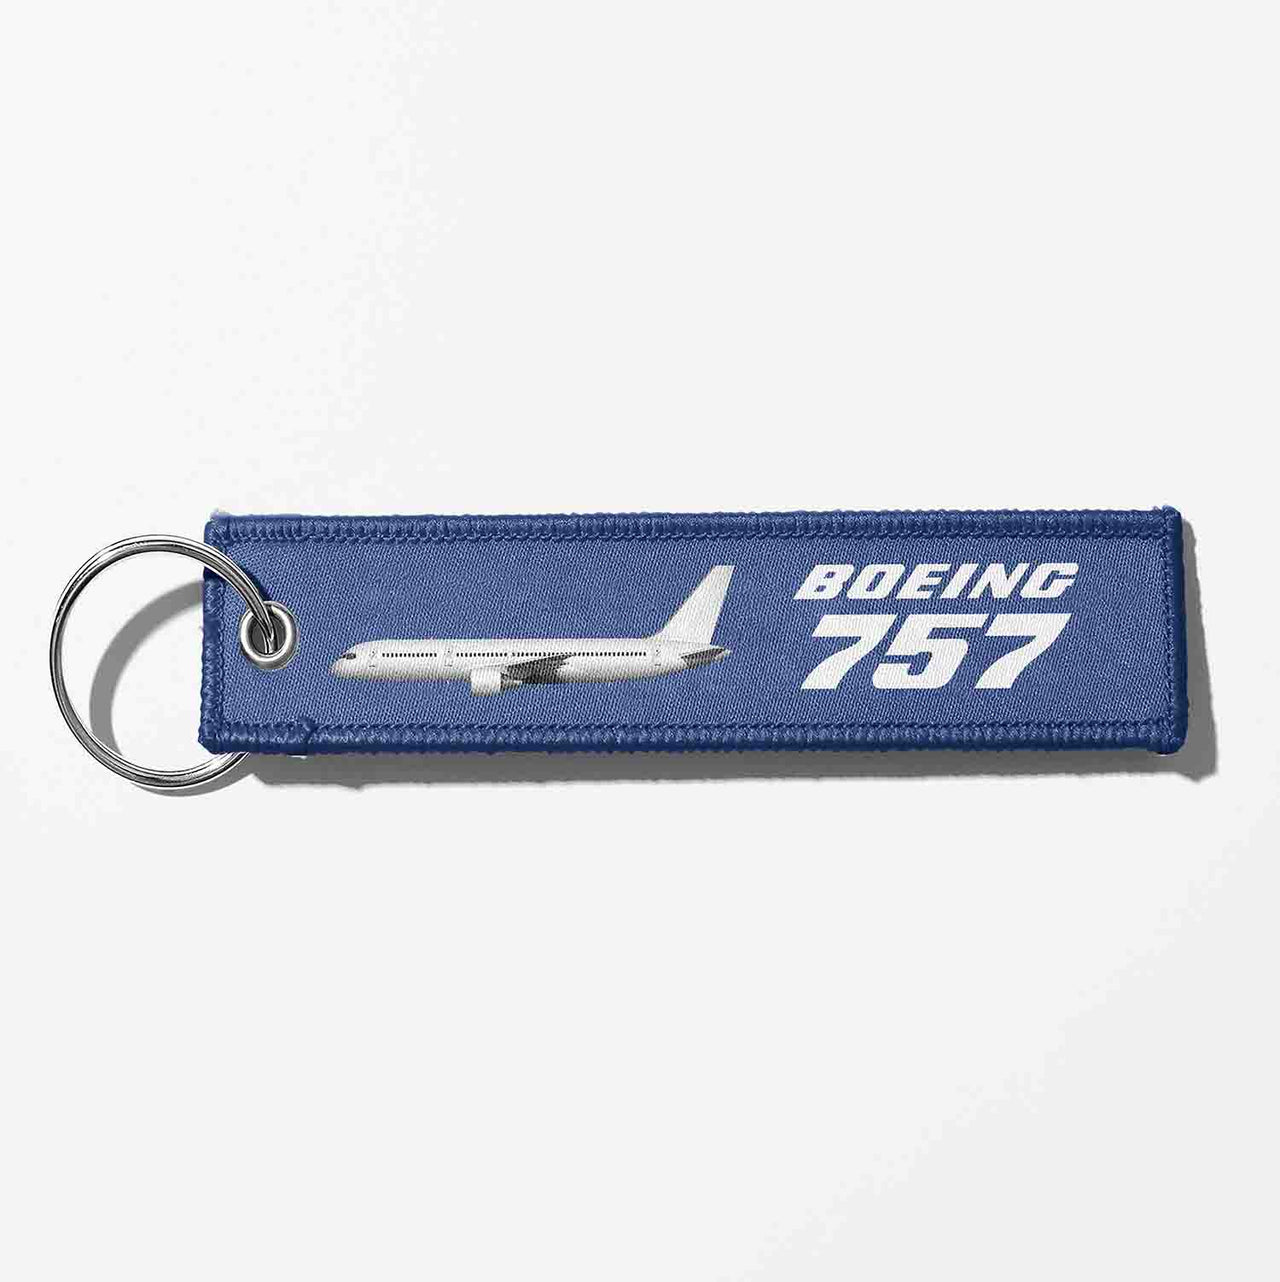 The Boeing 757 Designed Key Chains